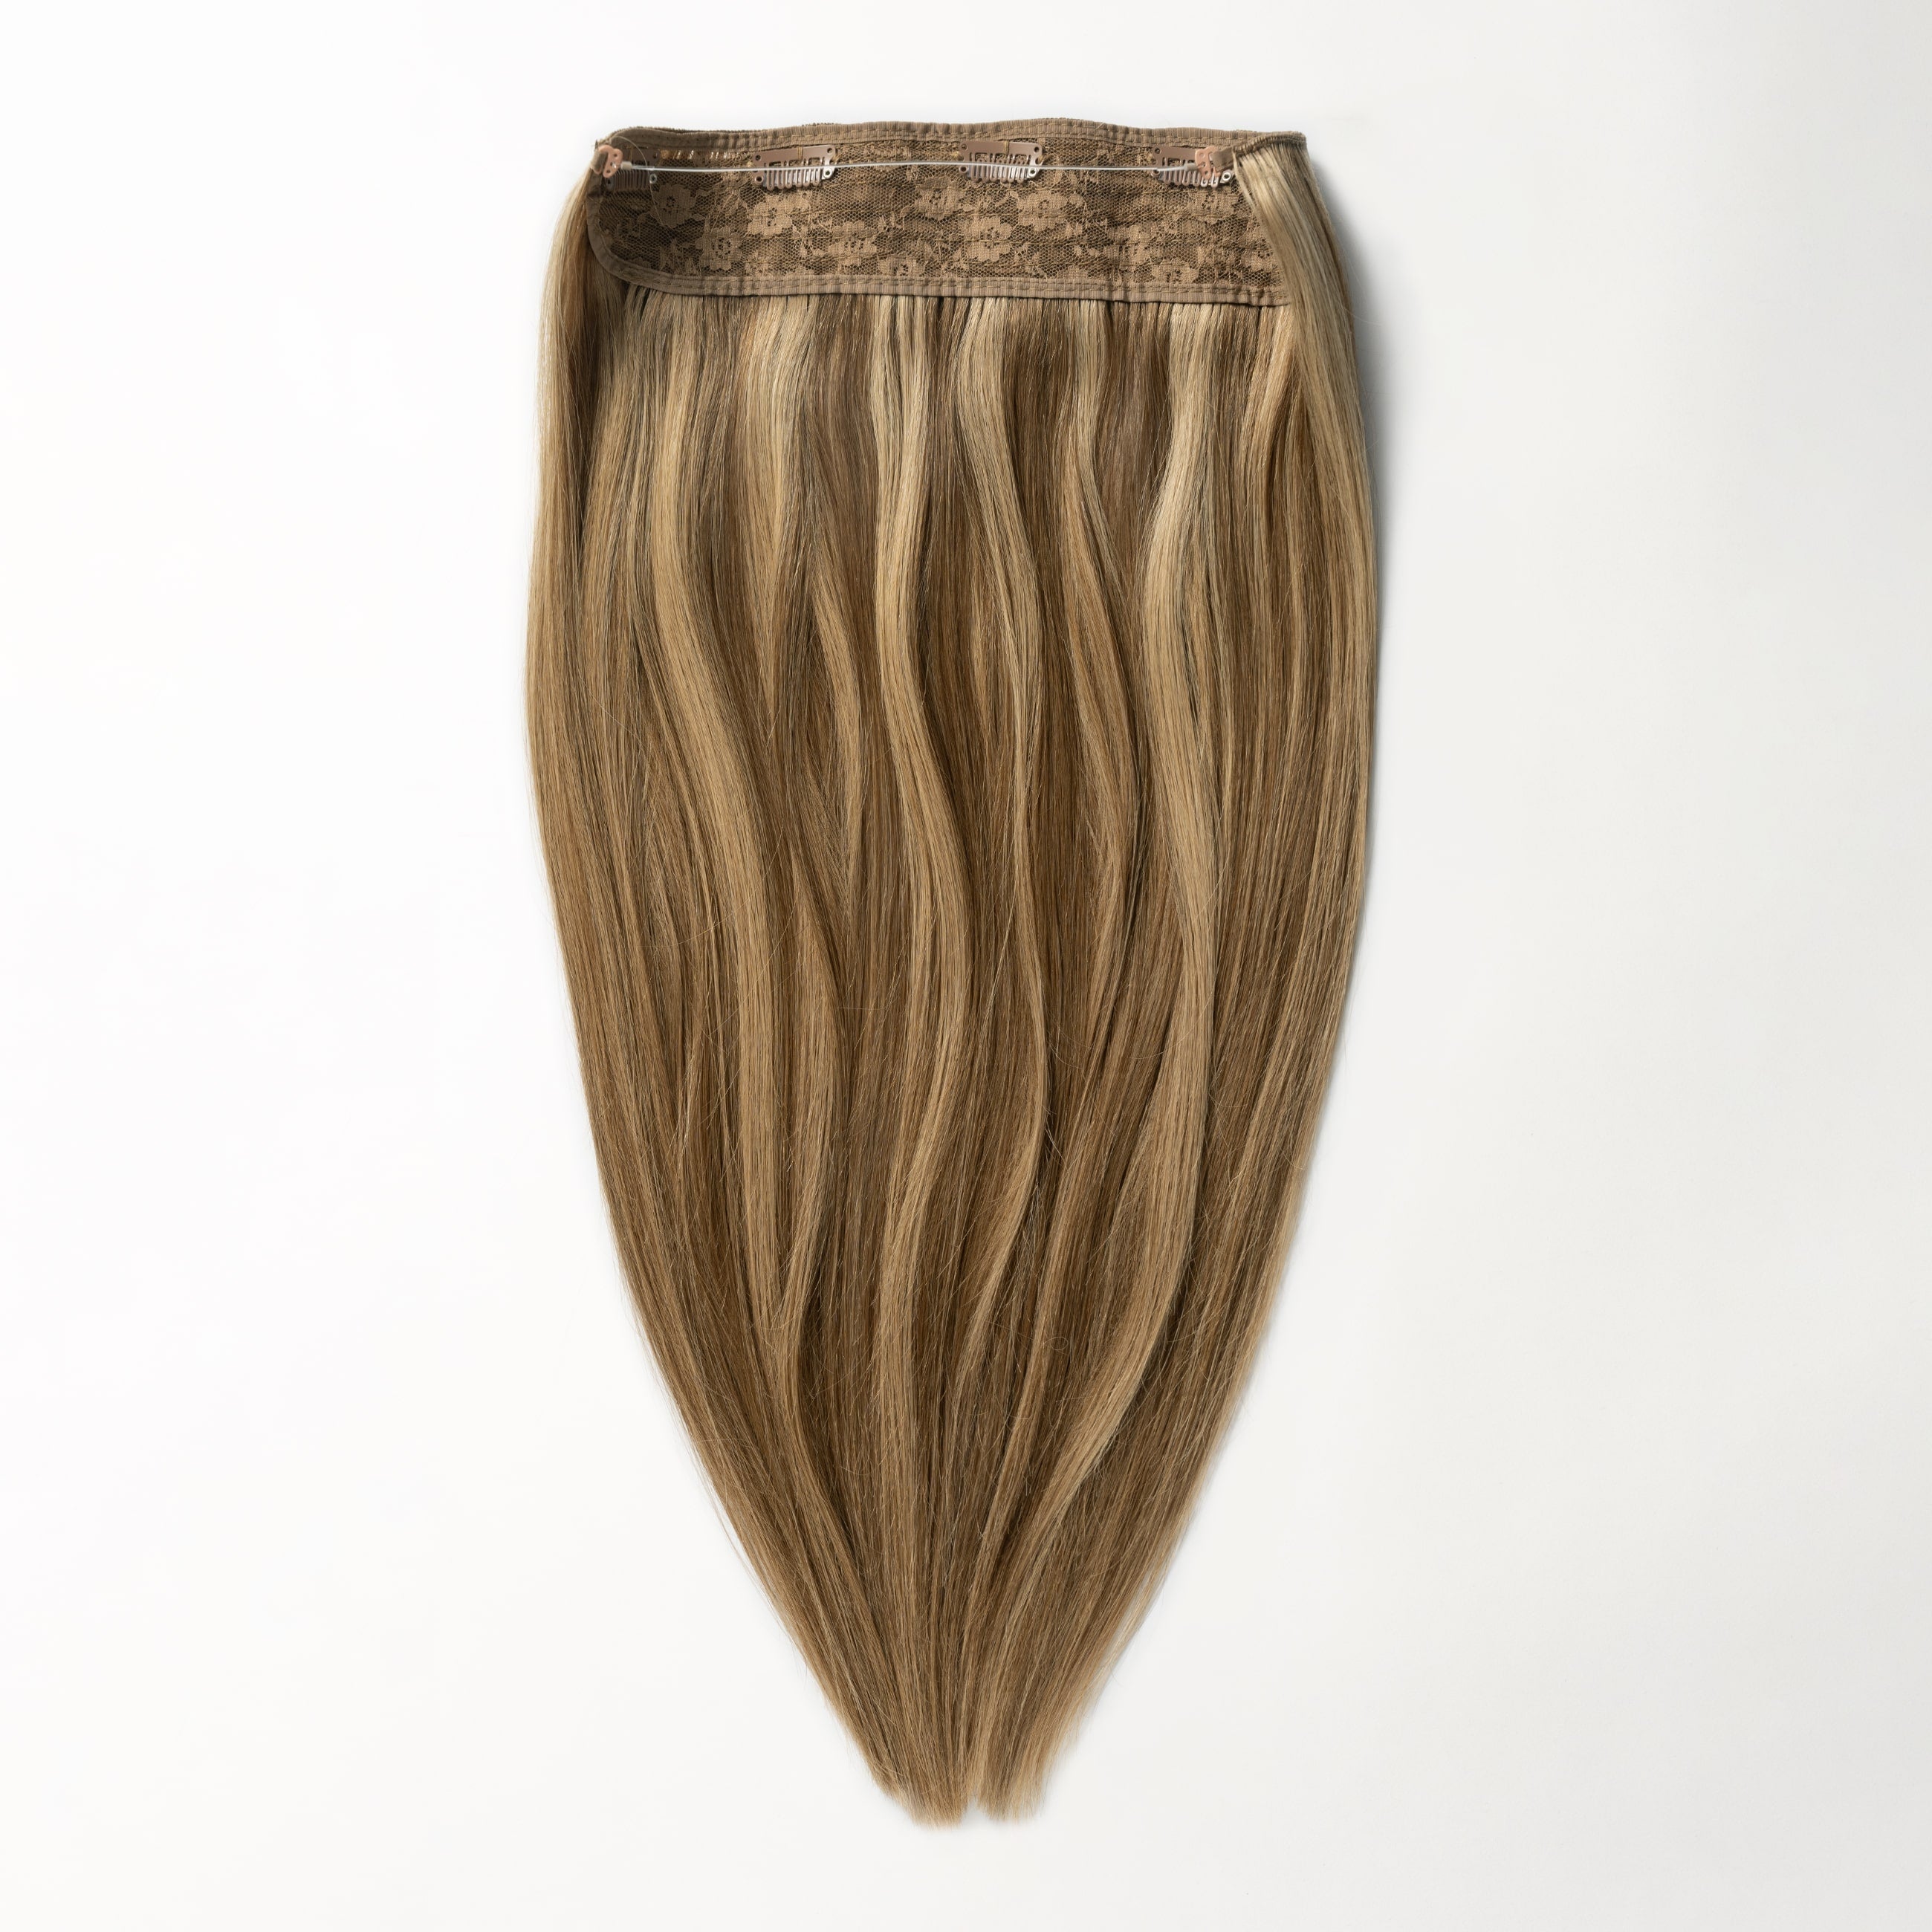 Halo hair extensions - Natural Brown Mix 3/10